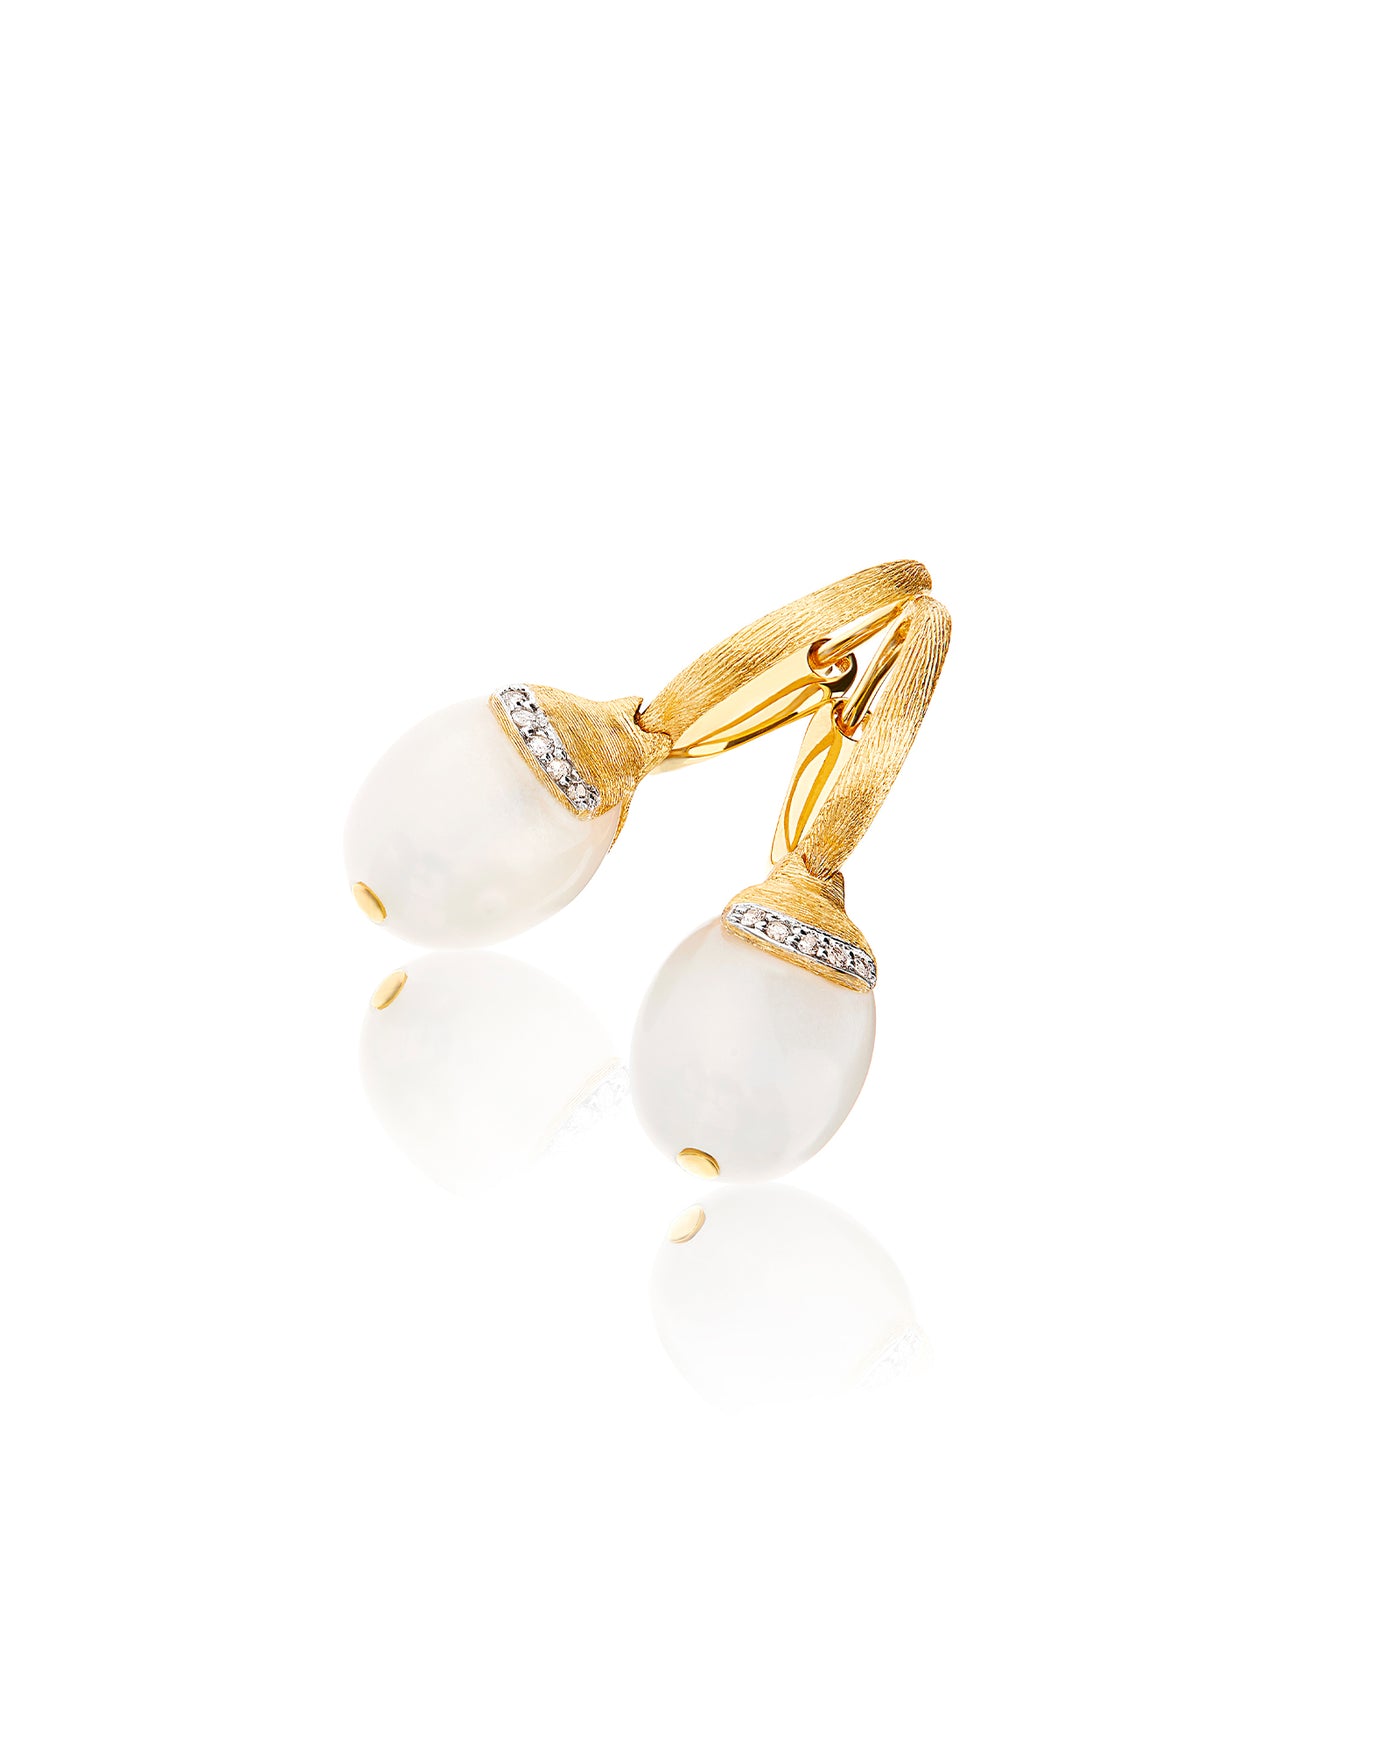 "White desert" ciliegine gold and white moonstone ball drop earrings with diamonds details (small)